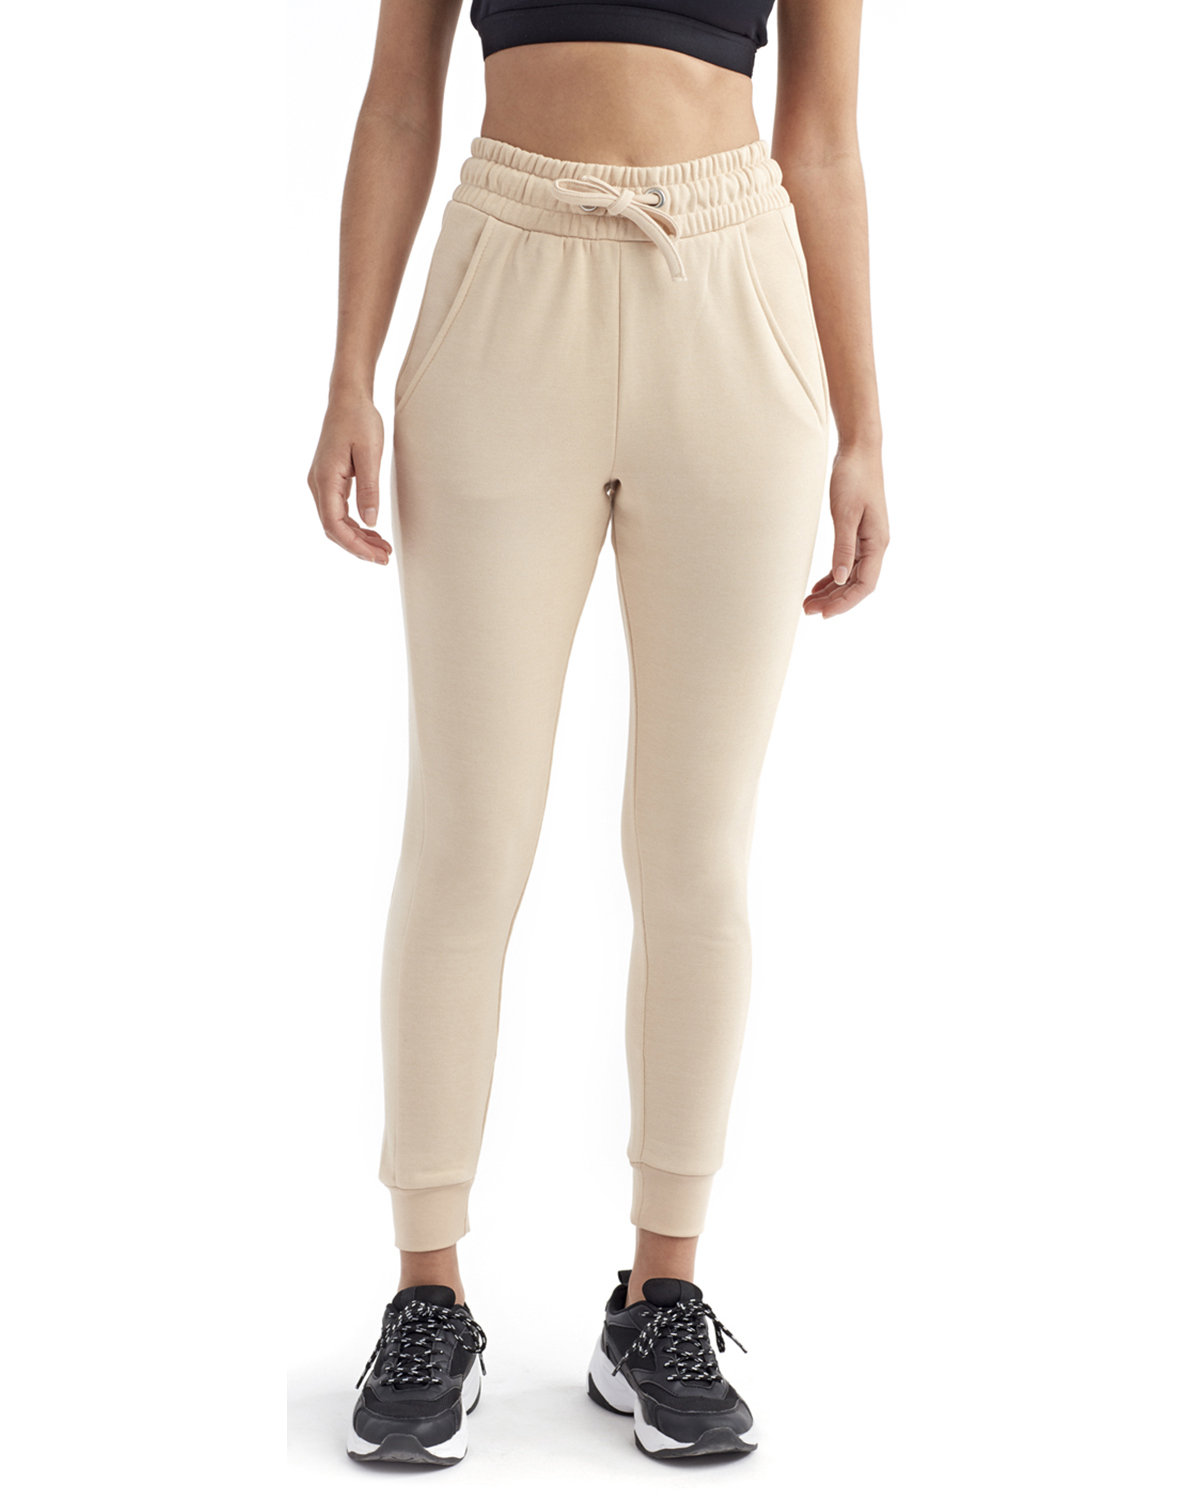 TriDri Ladies' Fitted Maria Jogger | alphabroder